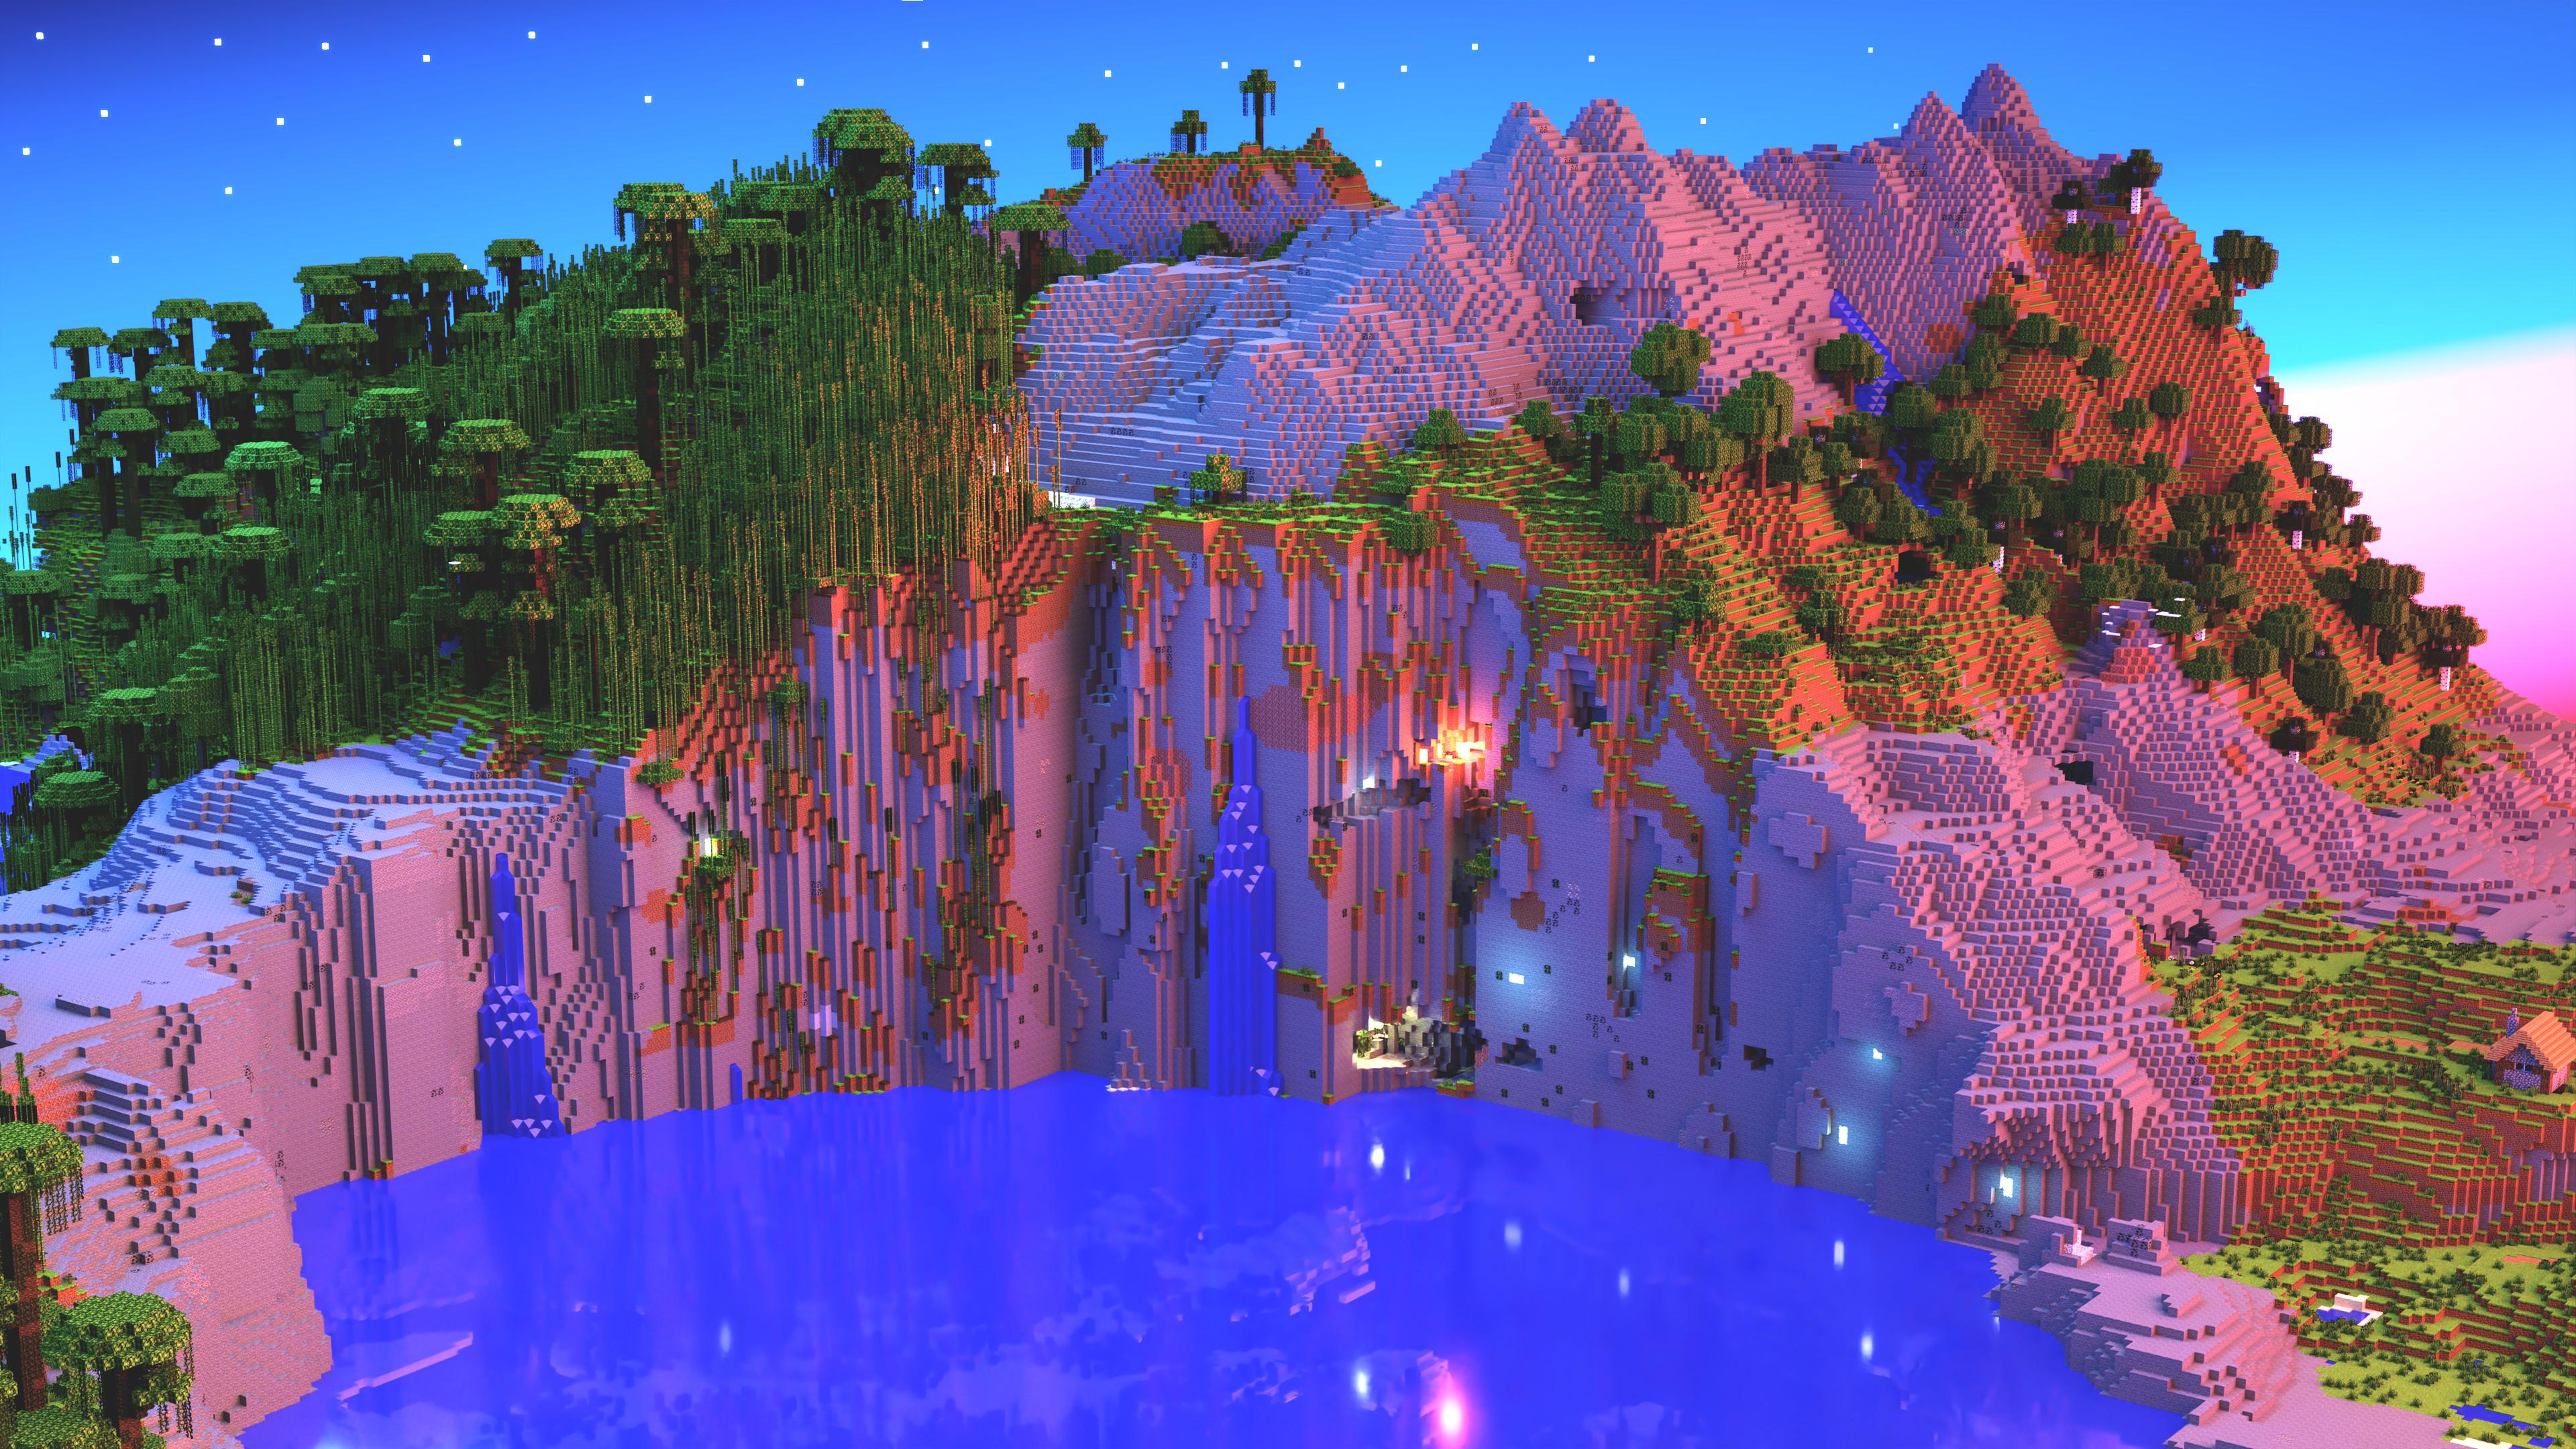 A minecraft world with mountains and water - Minecraft